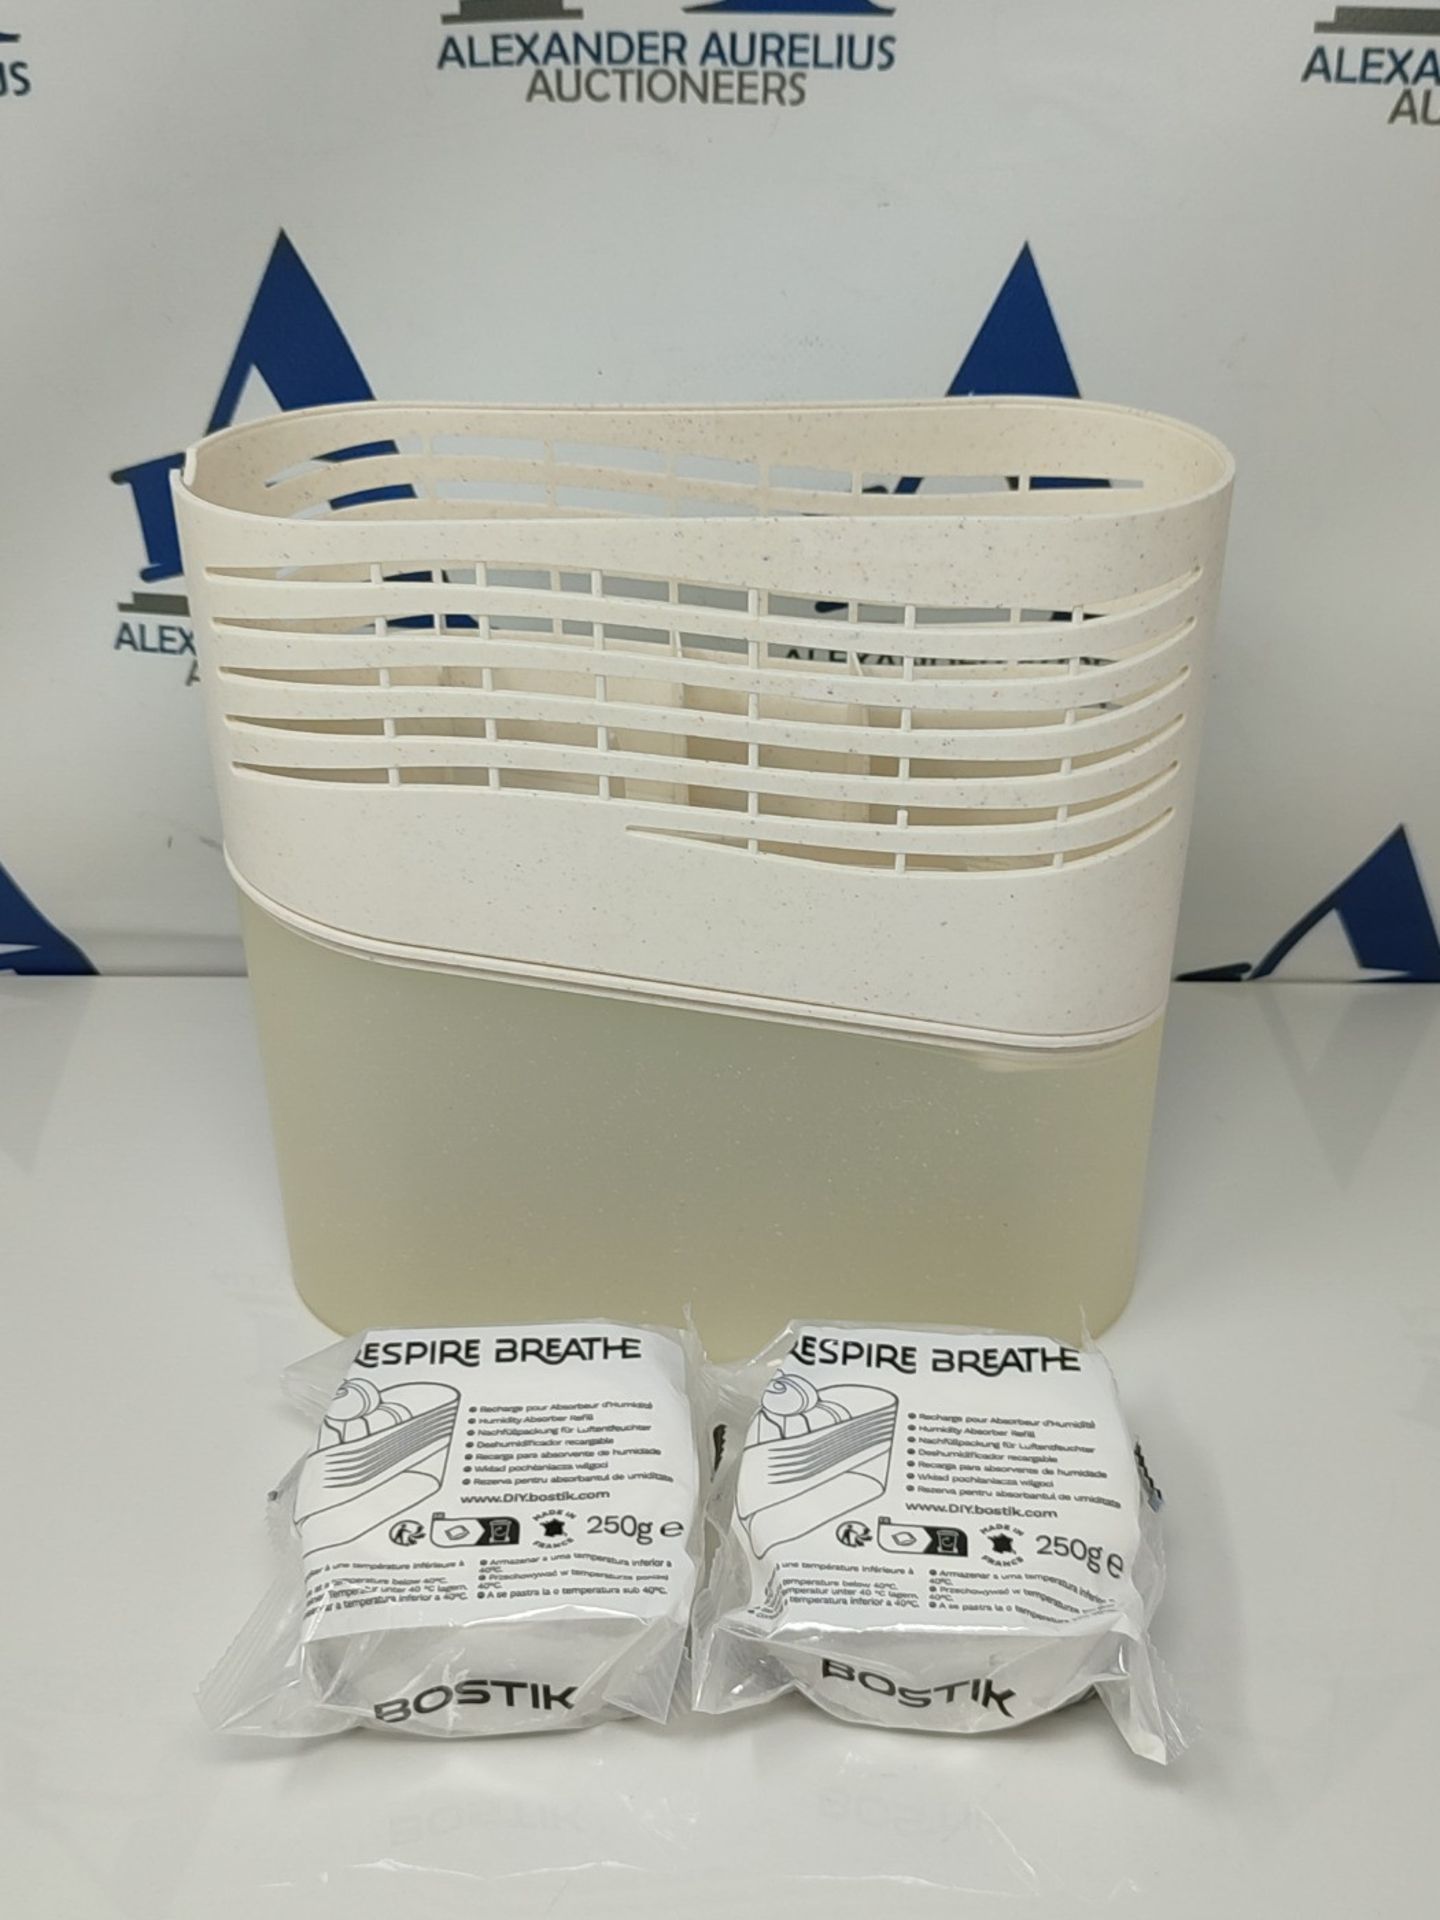 Bostik Breathe Dehumidifier, Humidity and Moisture Absorber, For Use Around the Home a - Image 2 of 2